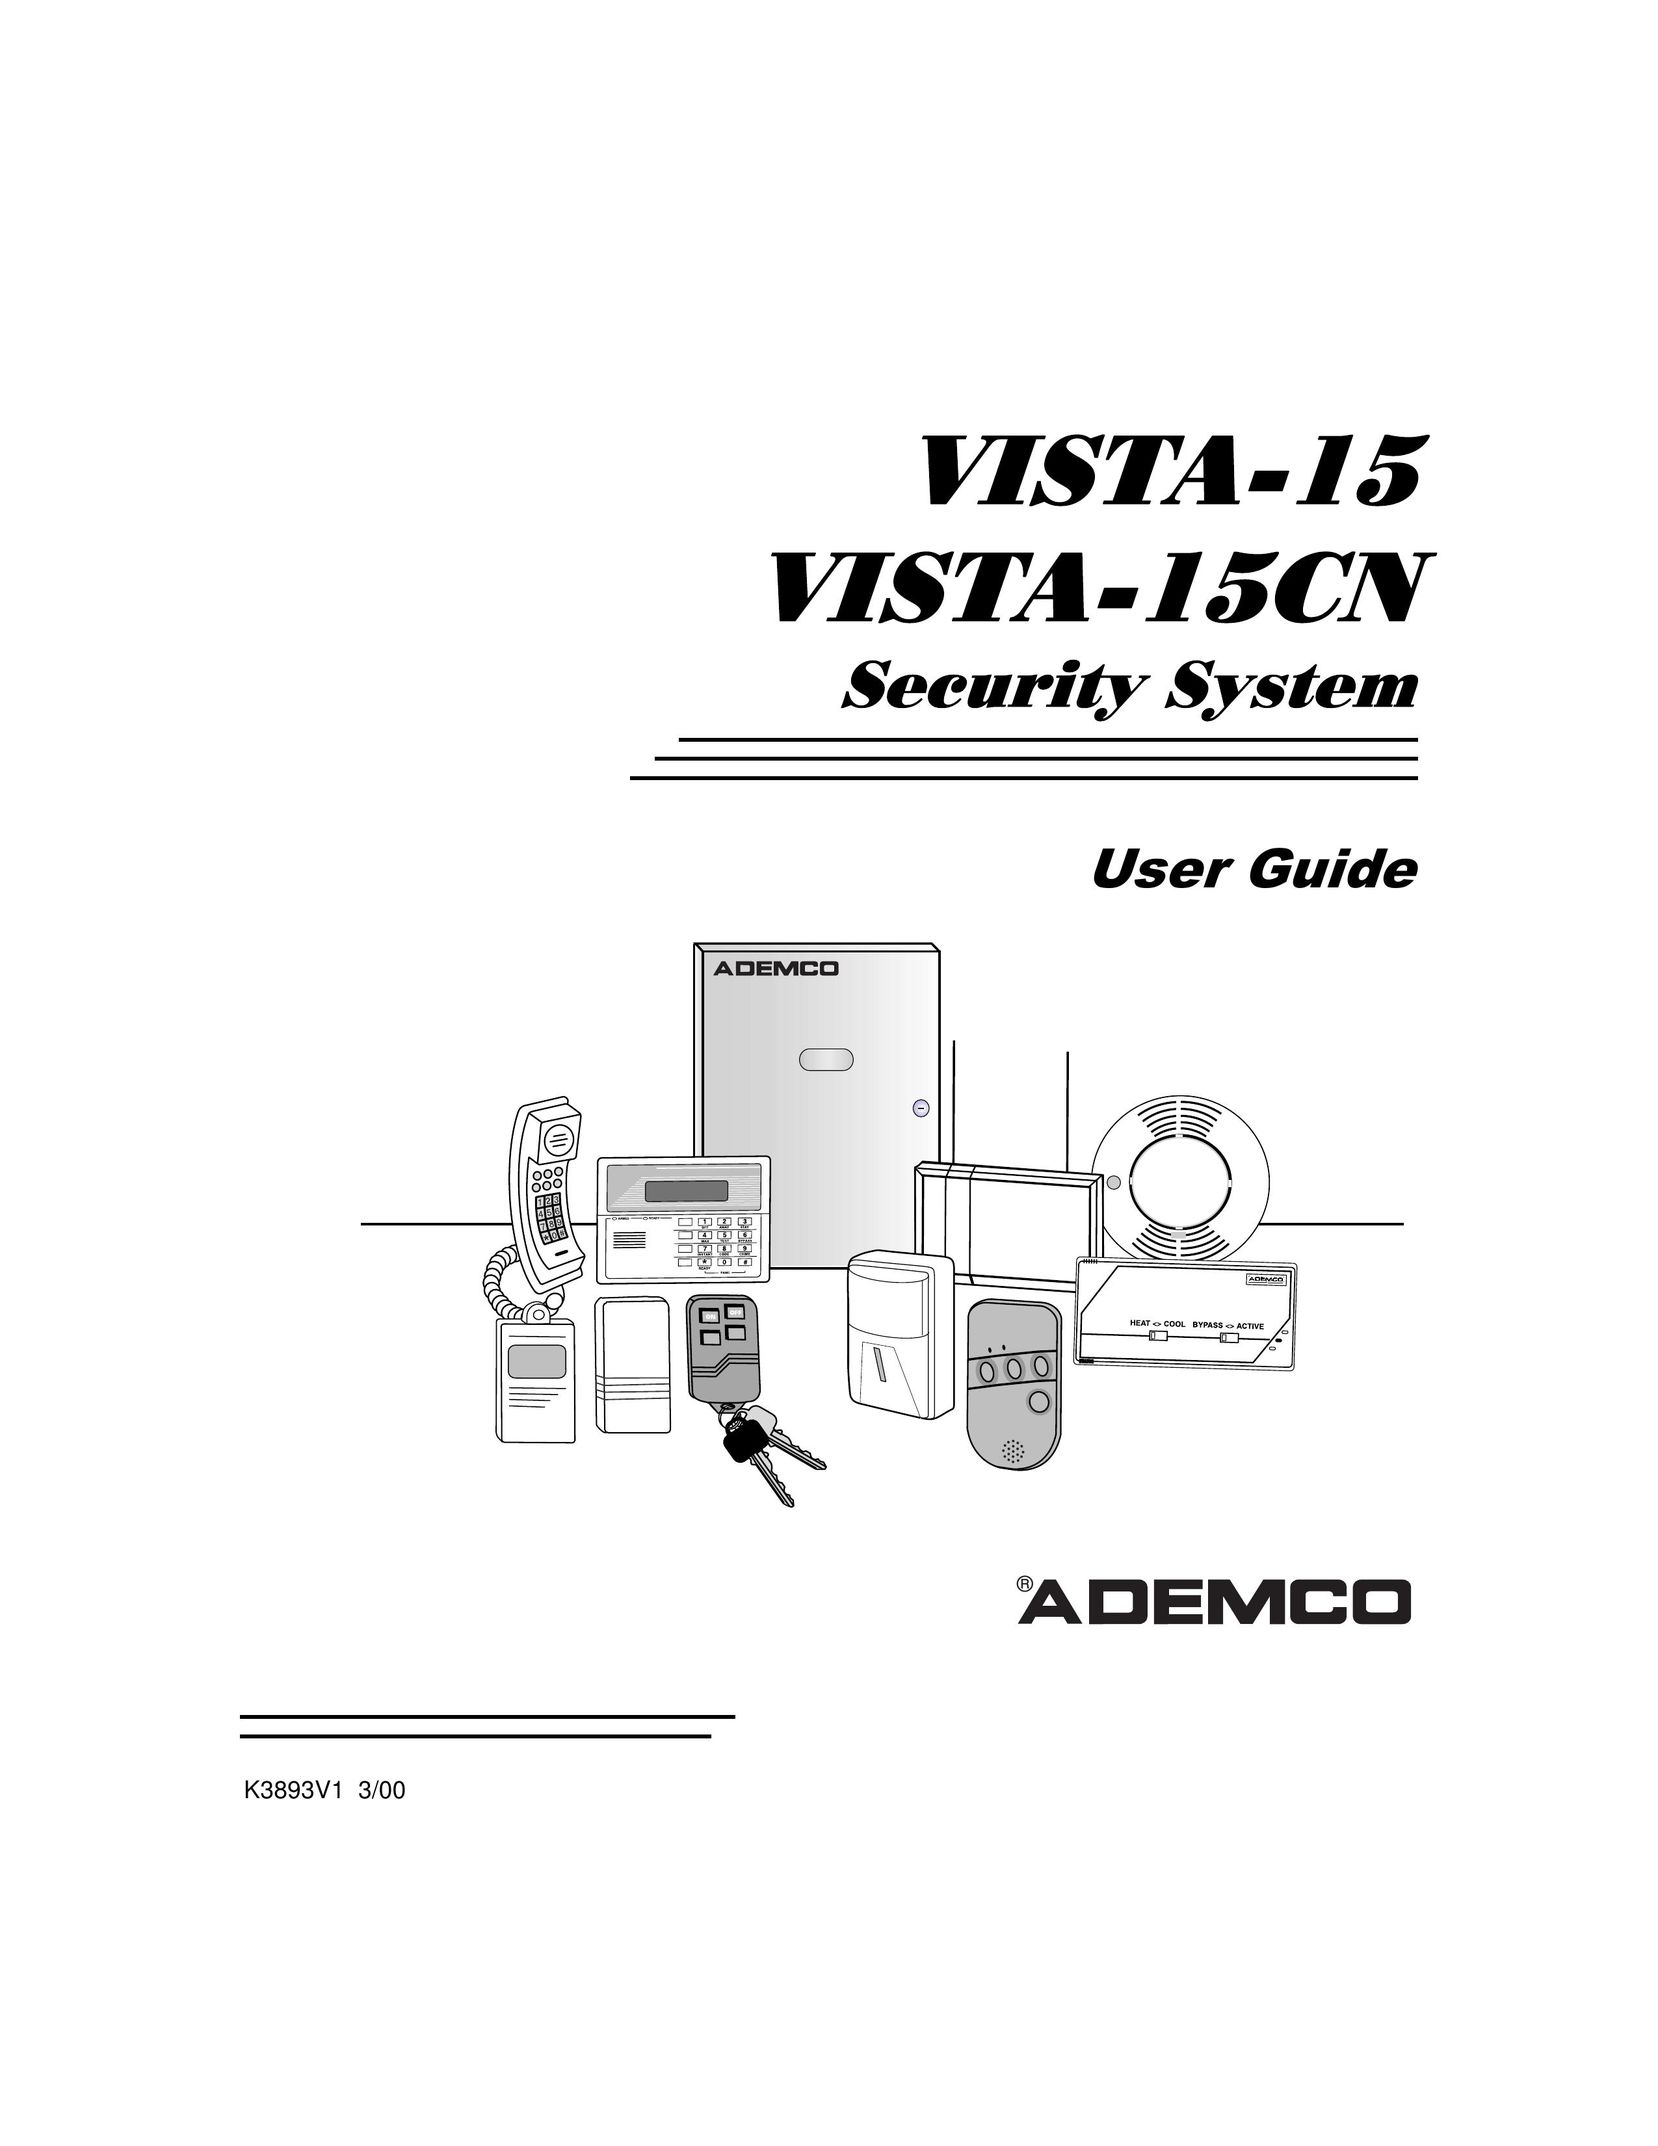 ADT Security Services VISTA-15CN Home Security System User Manual